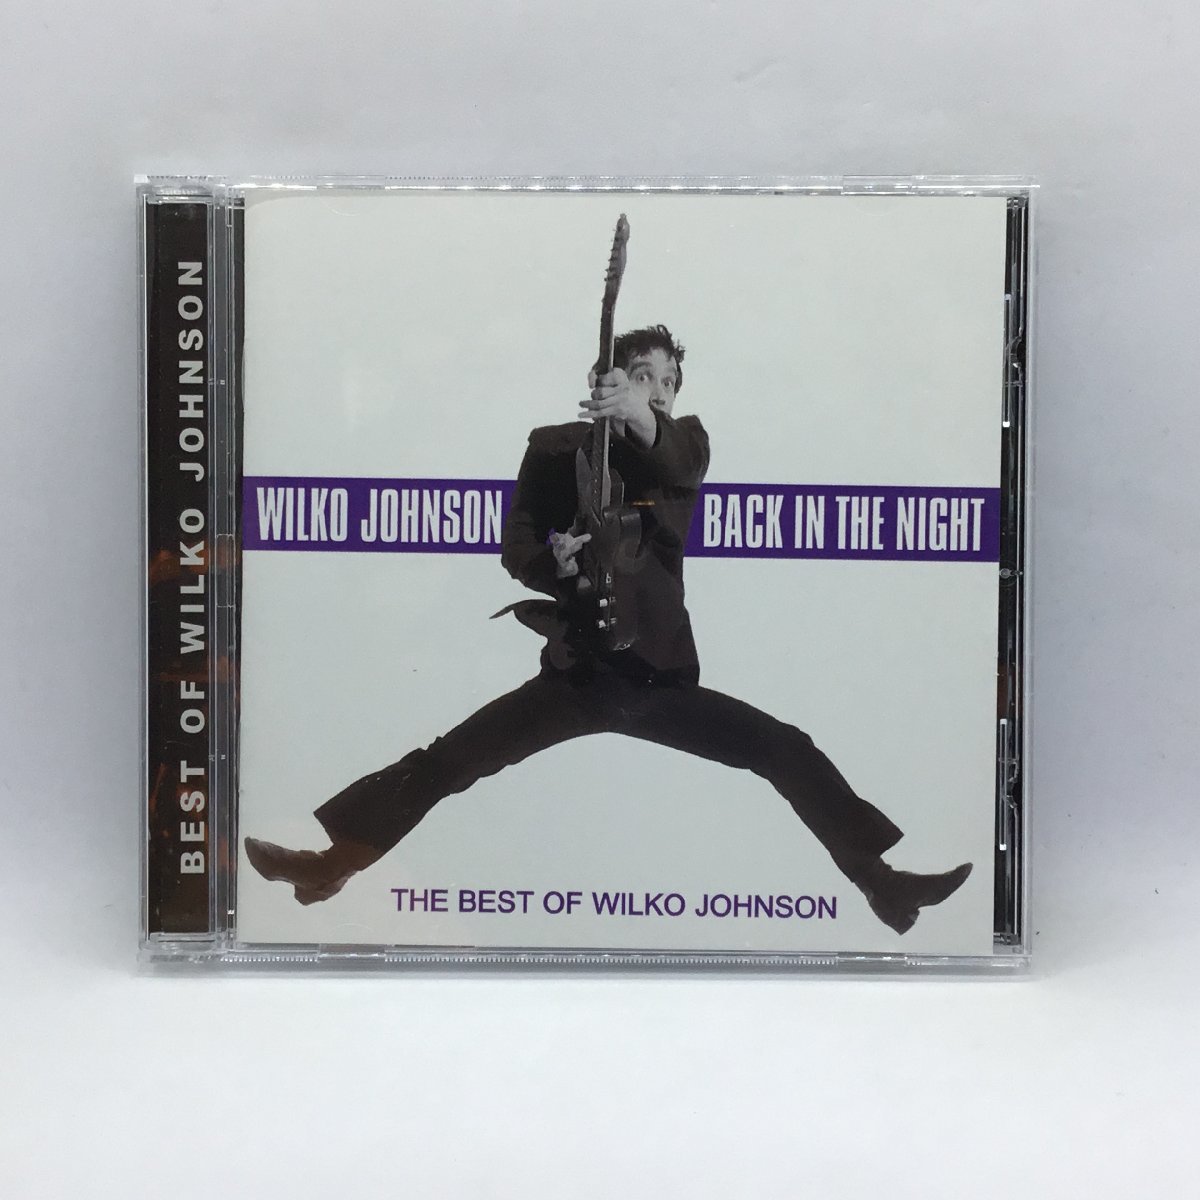 WILCO JOHNSON / BACK IN THE NIGHT (CD) FREUD CD 078